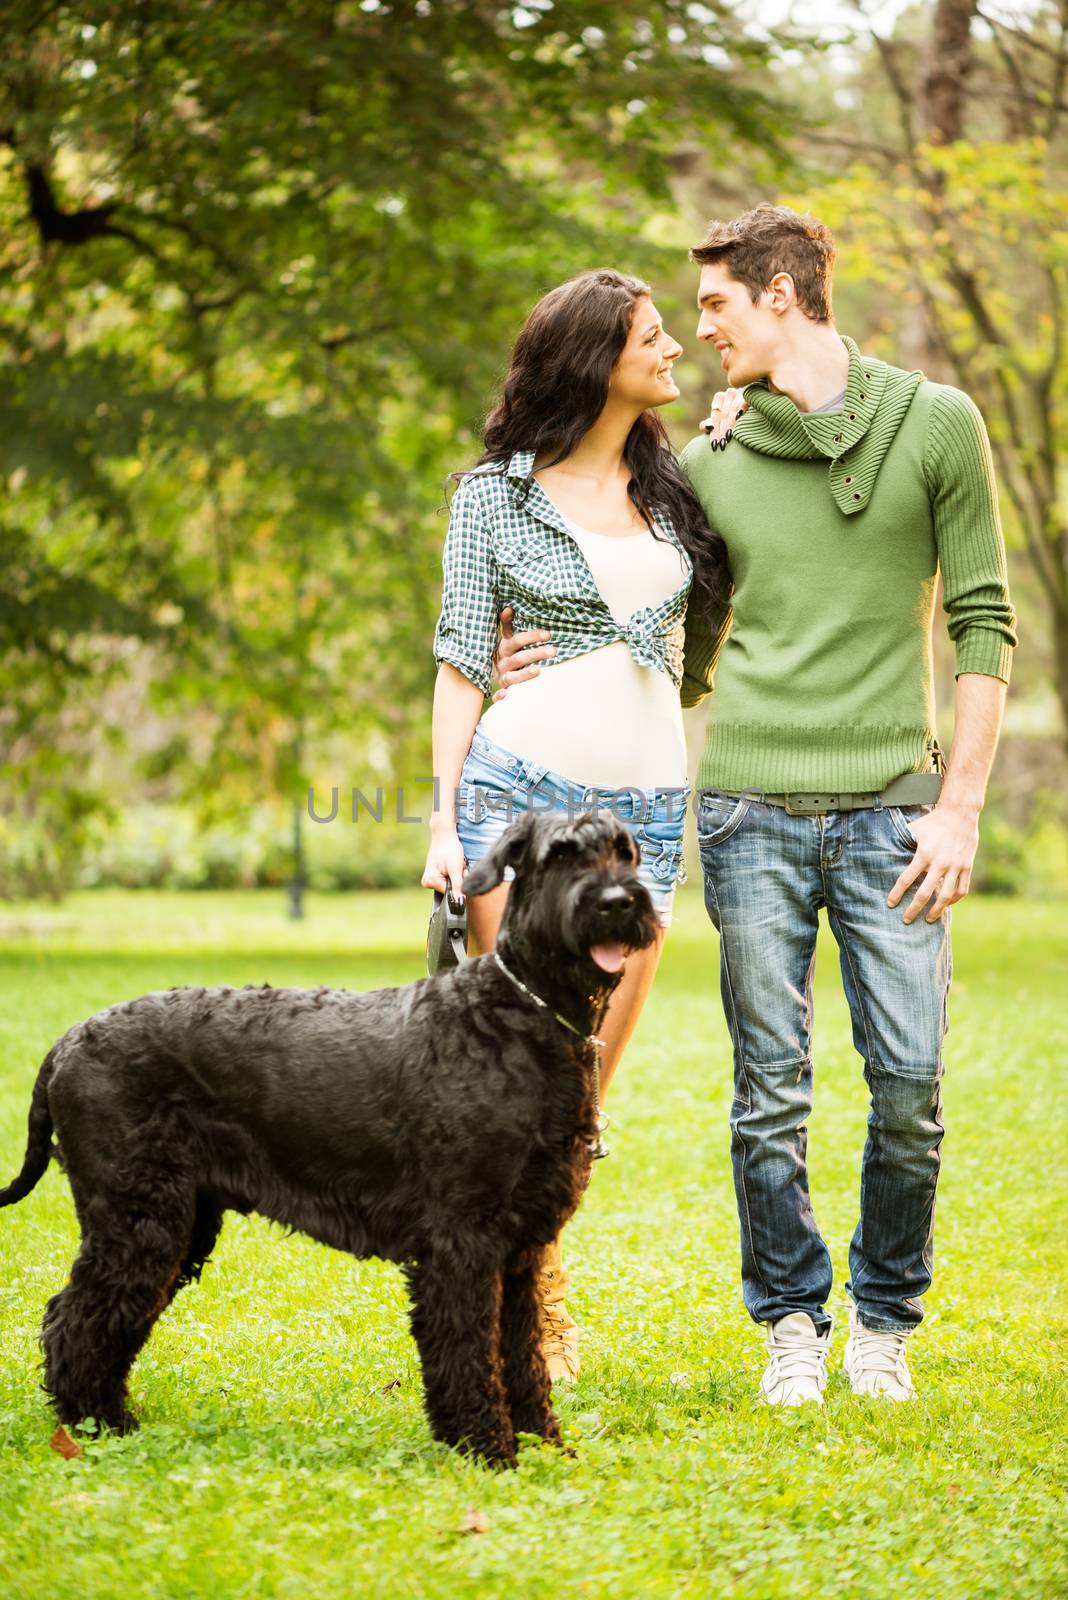 Young Couple With Giant Schnauzer by MilanMarkovic78